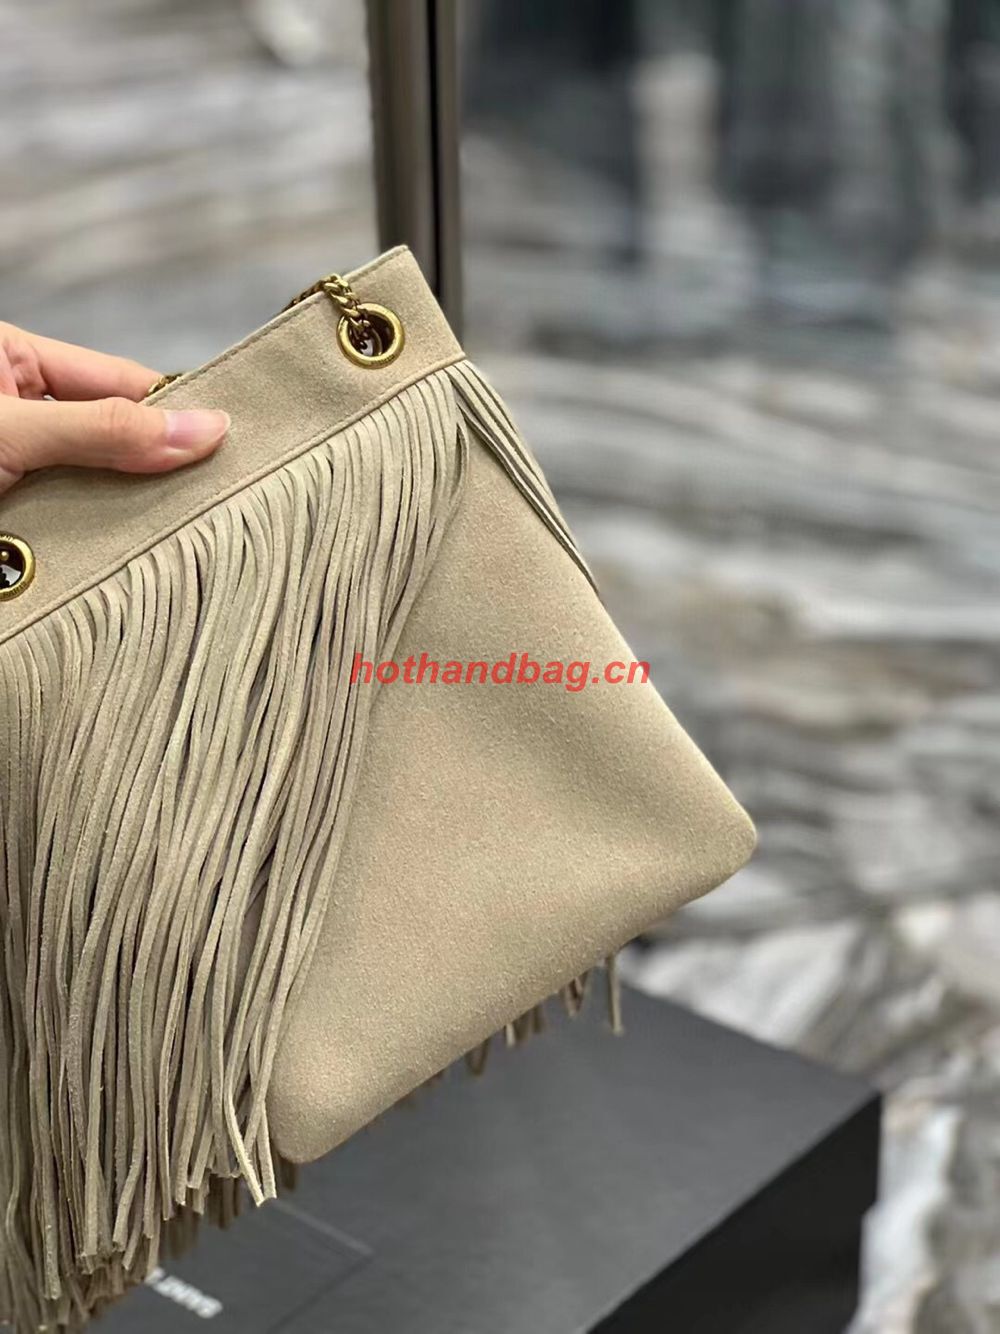 SAINT LAURENT SMALL CHAIN BAG IN LIGHT SUEDE WITH FRINGES 683378 GRAY